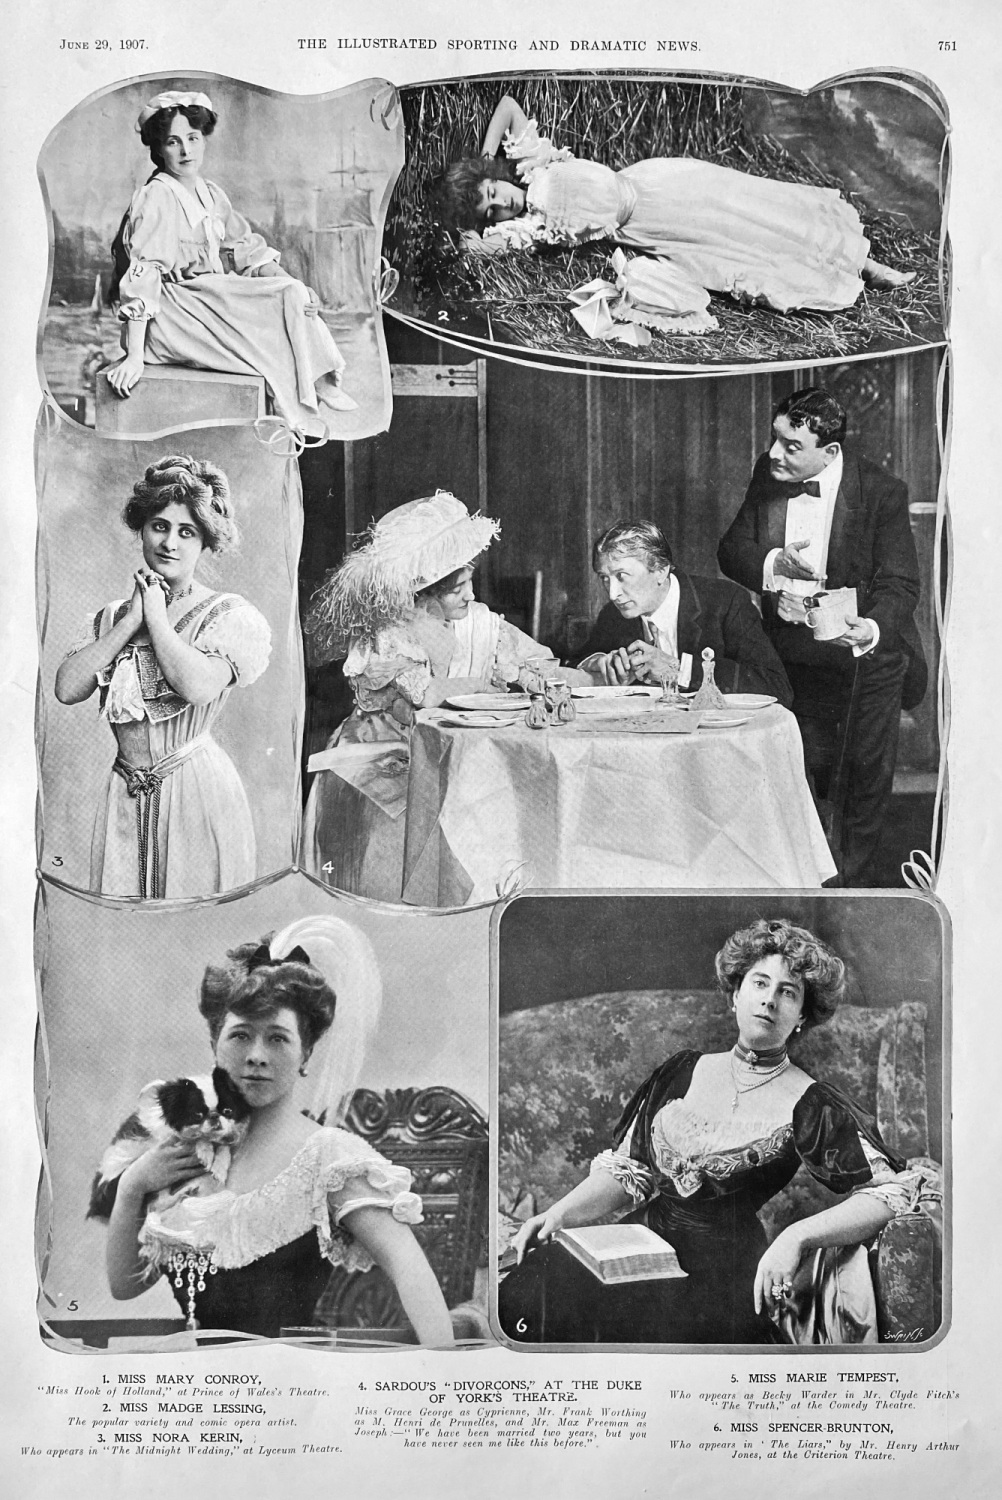 Actresses from the Stage at this time 1907.